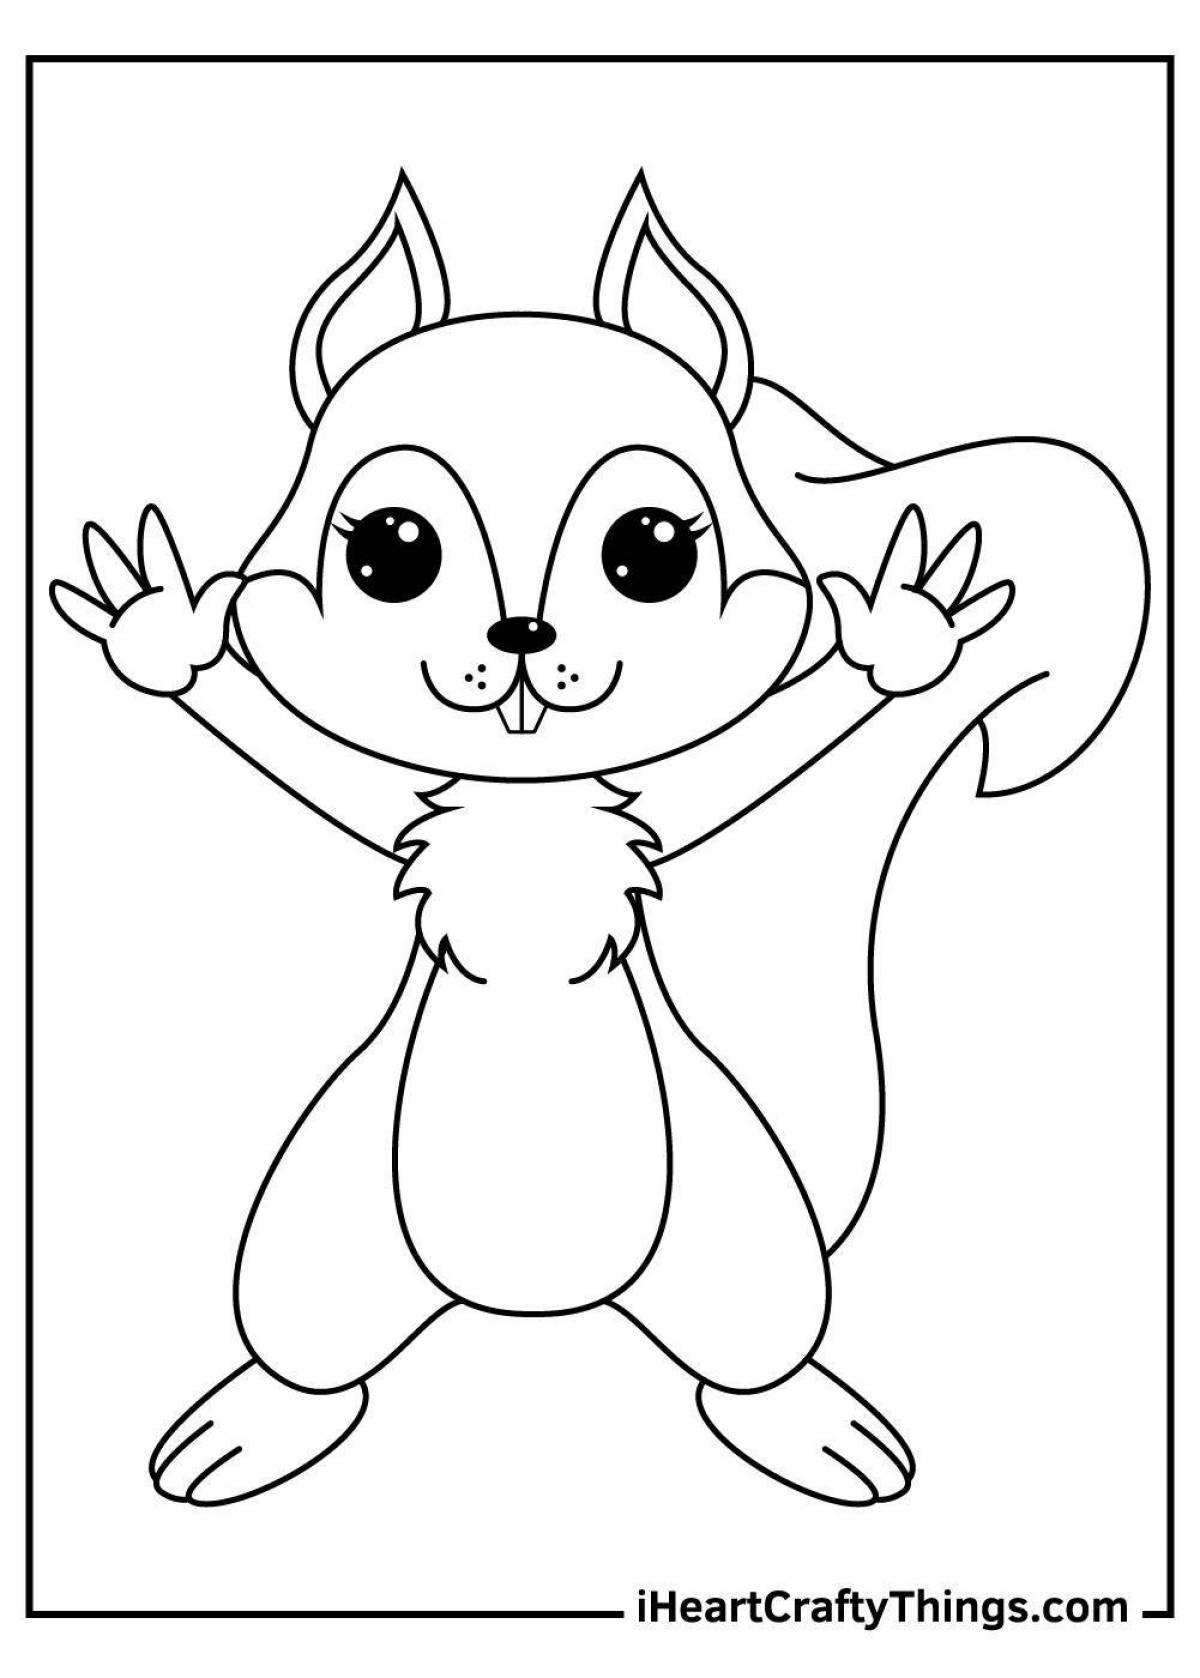 Delightful squirrel coloring book for children 2-3 years old